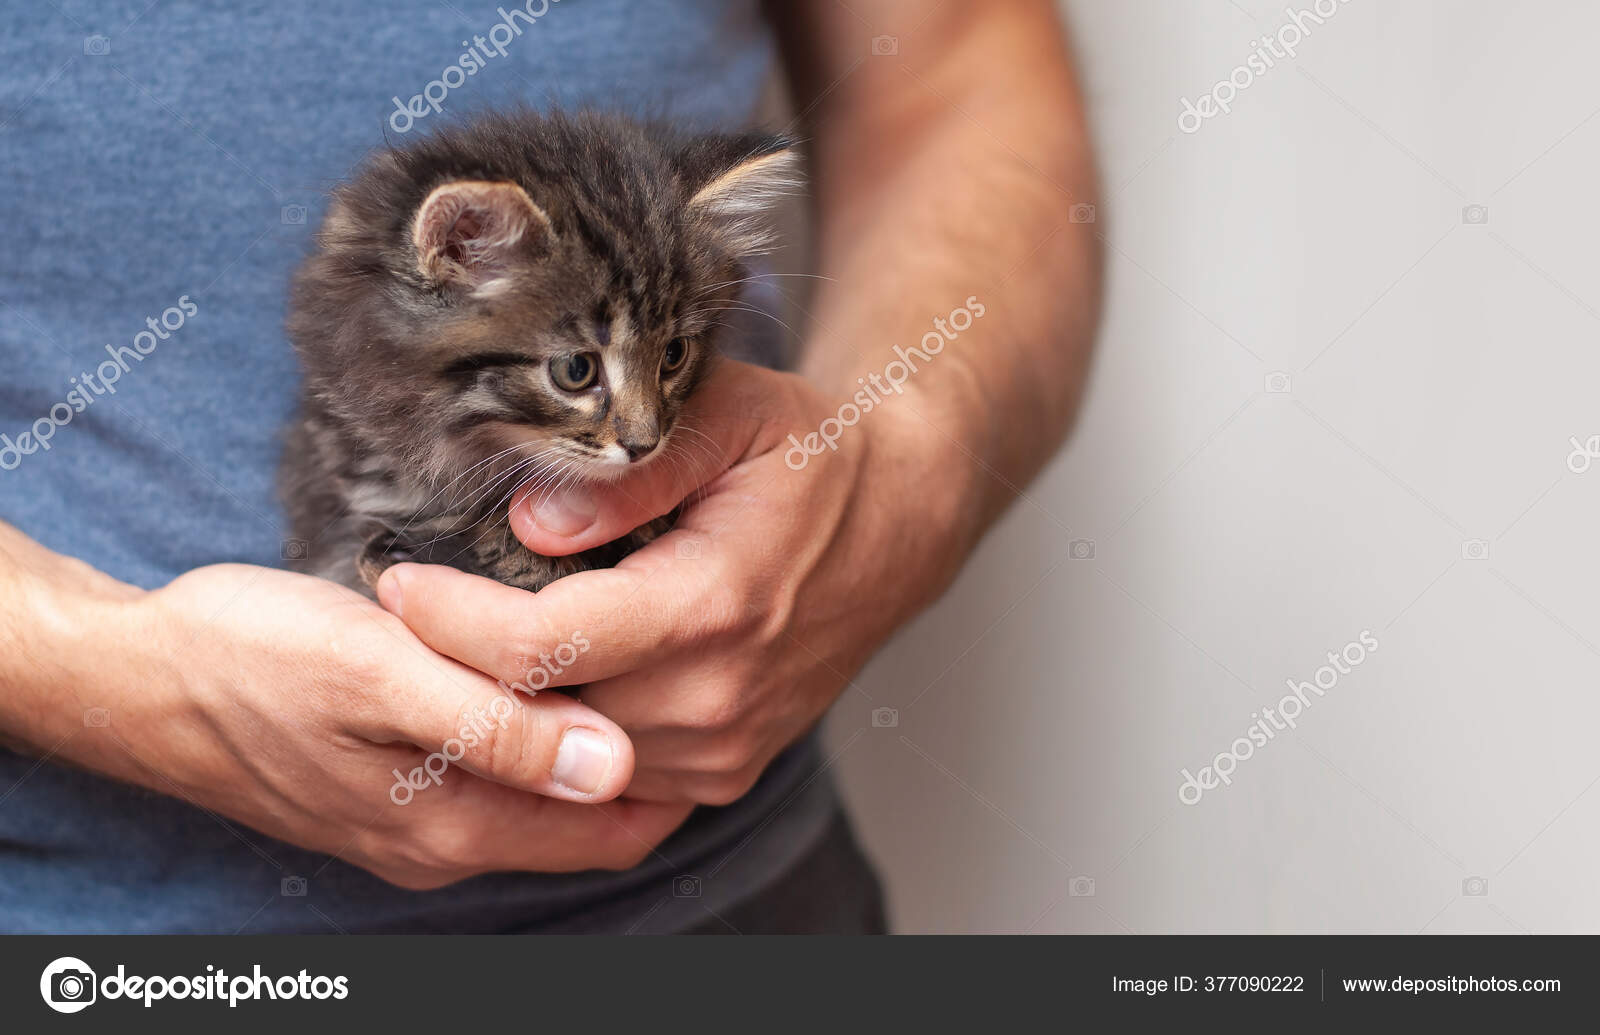 Man Hands Hold Beautiful Cute Little Kitten Tiny Cat Baby Stock Photo by  © 377090222